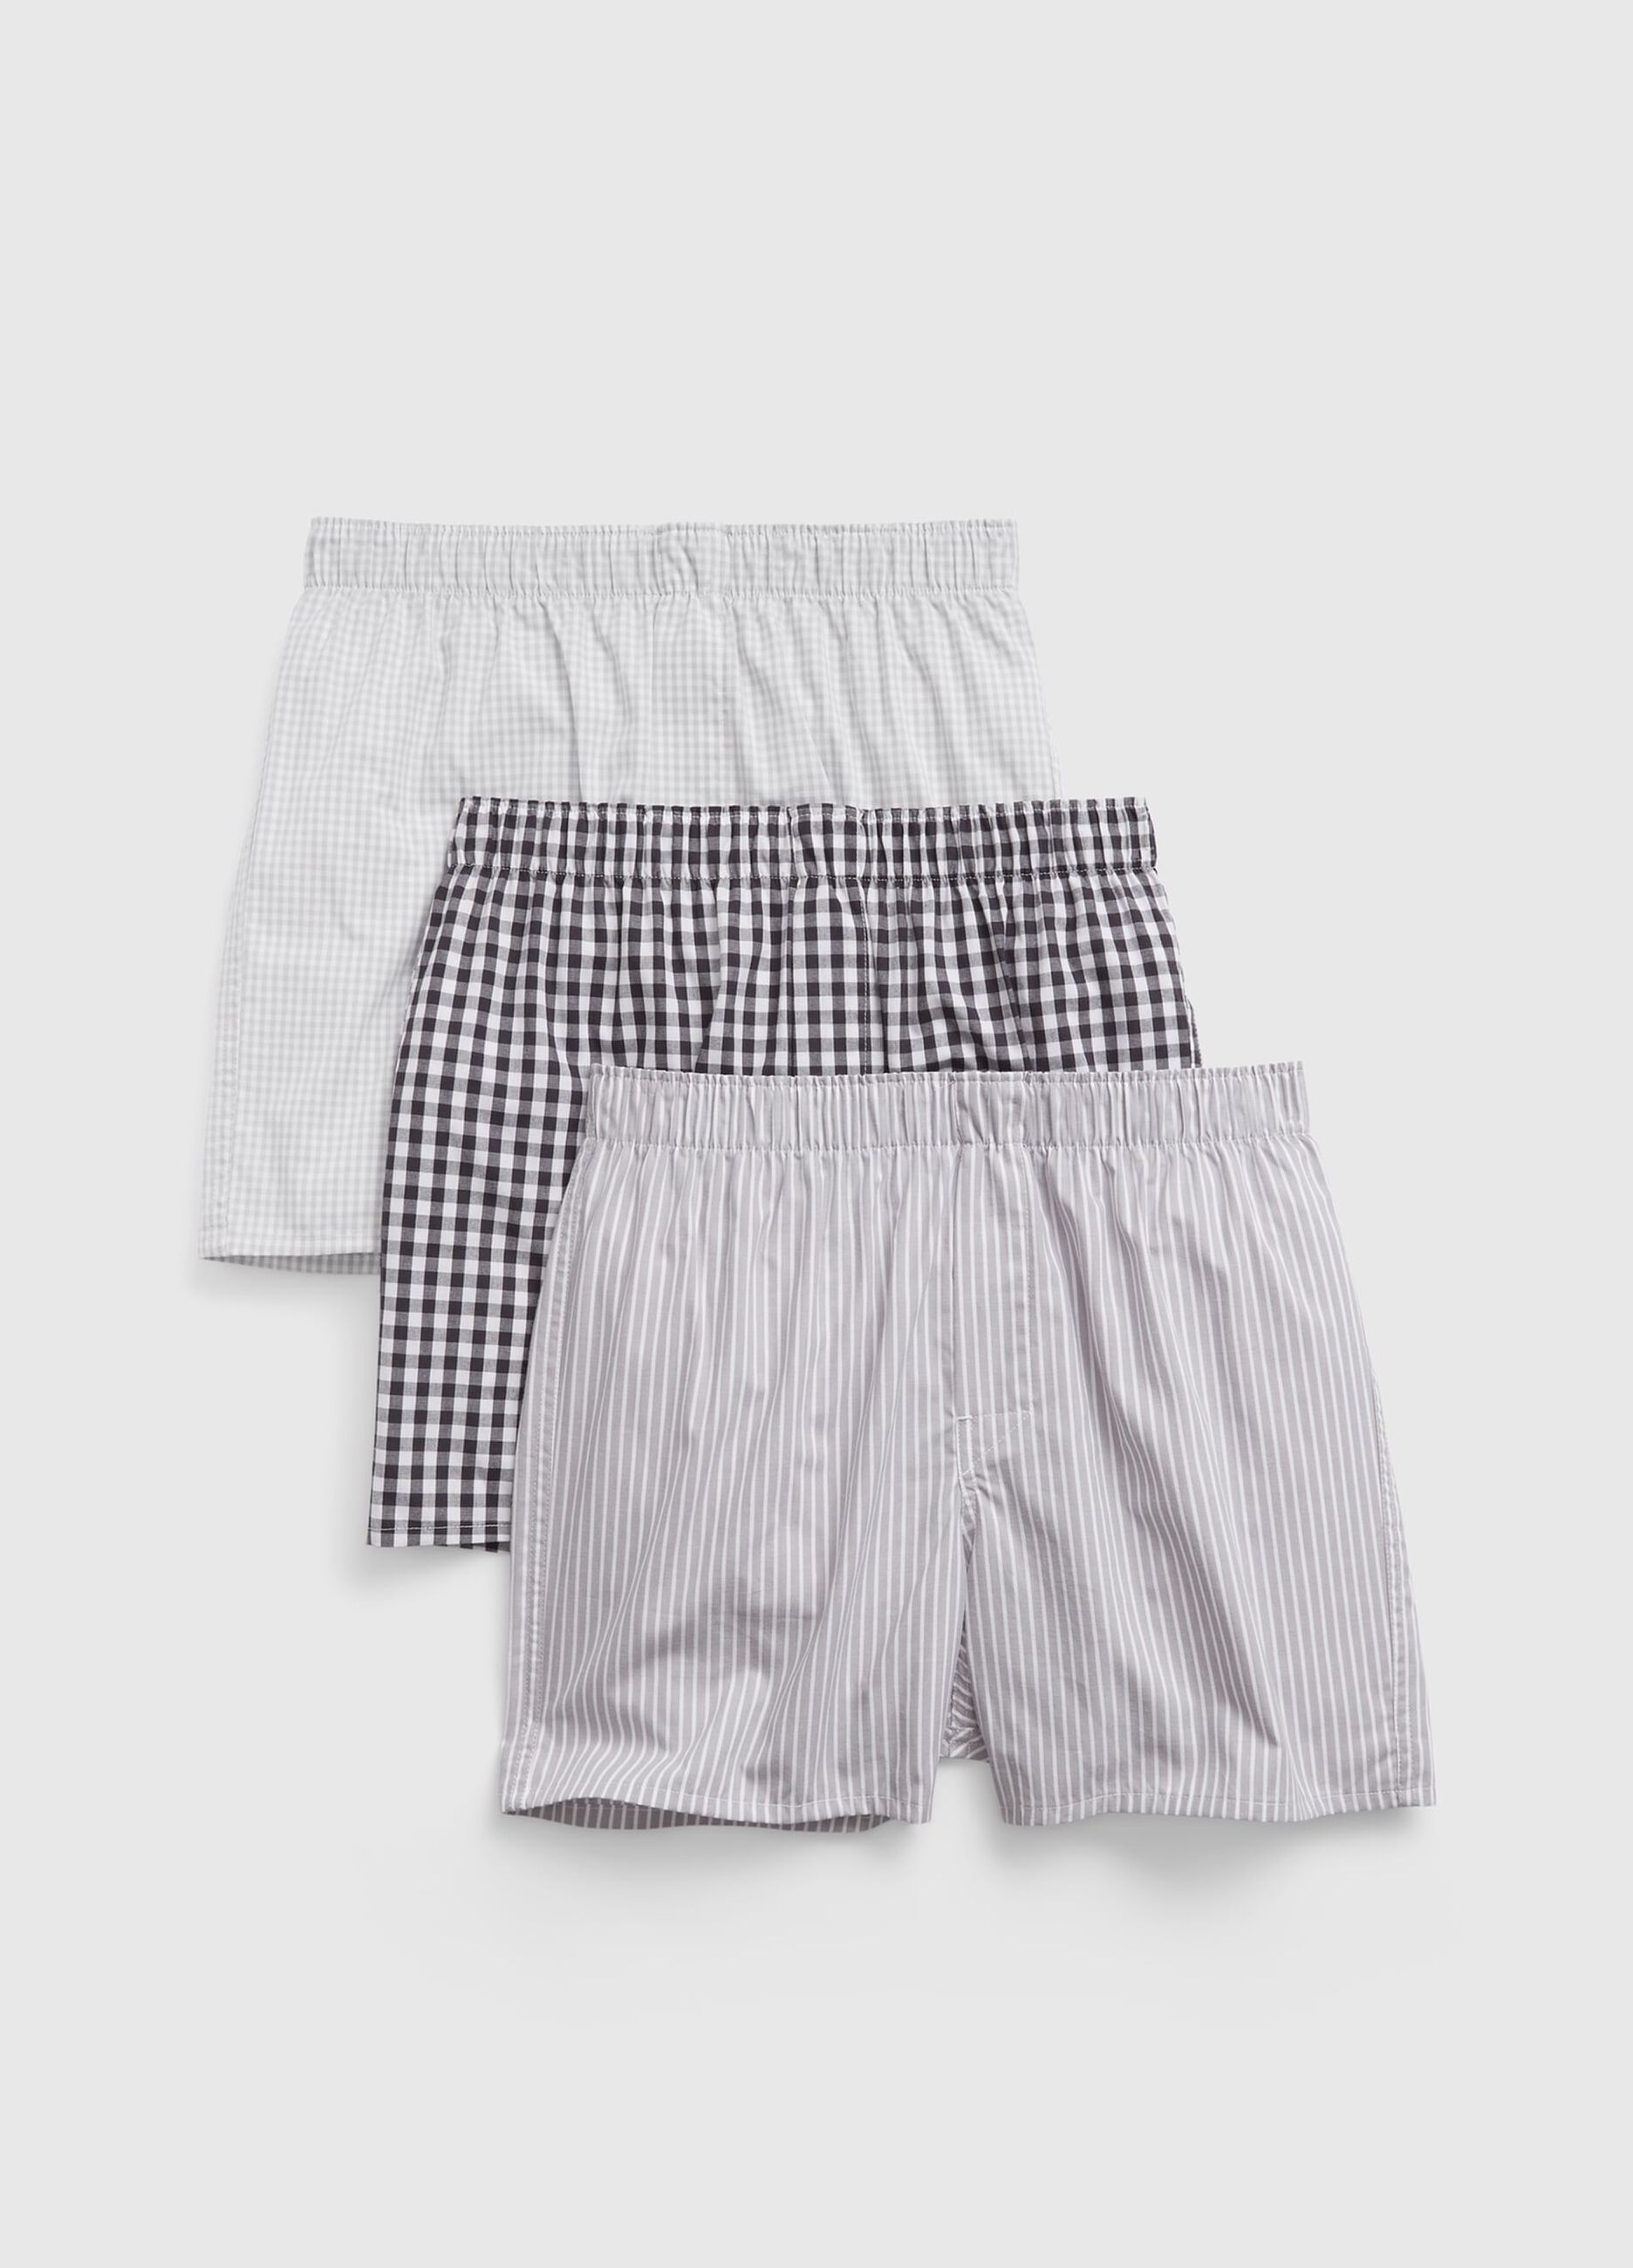 Three-pack patterned woven boxer shorts